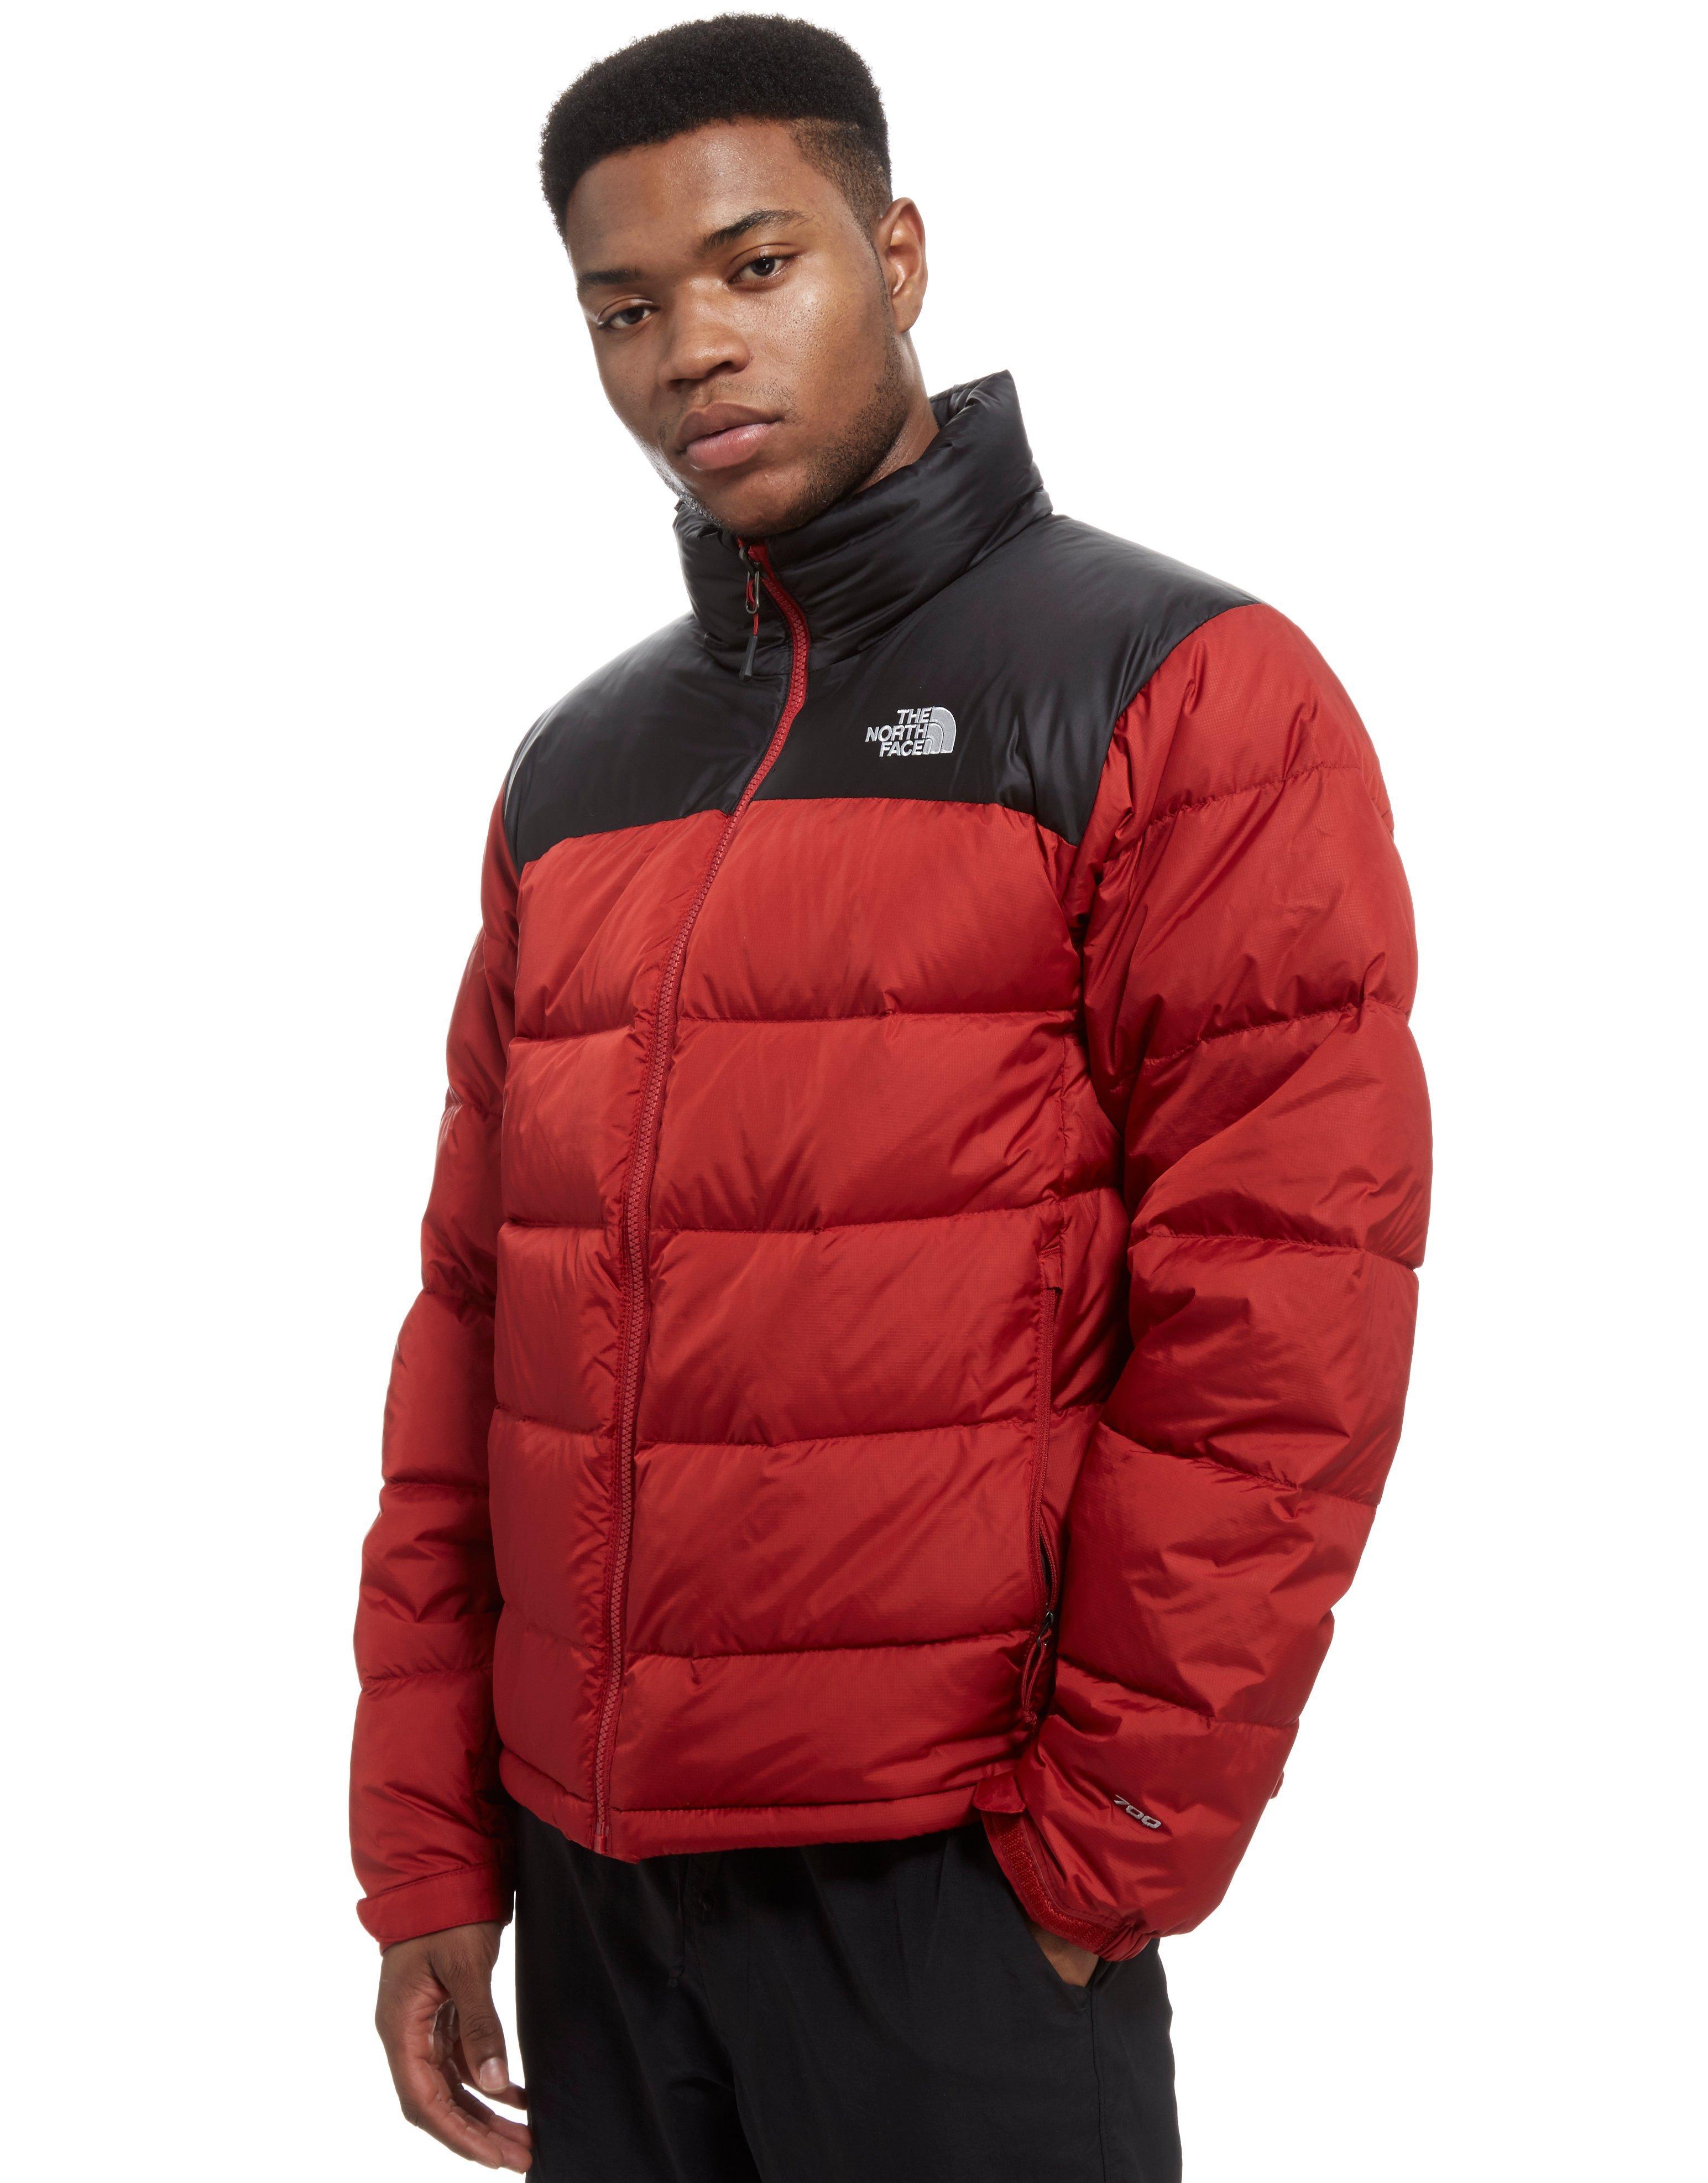 Lyst - The North Face Nuptse 2 Jacket in Red for Men